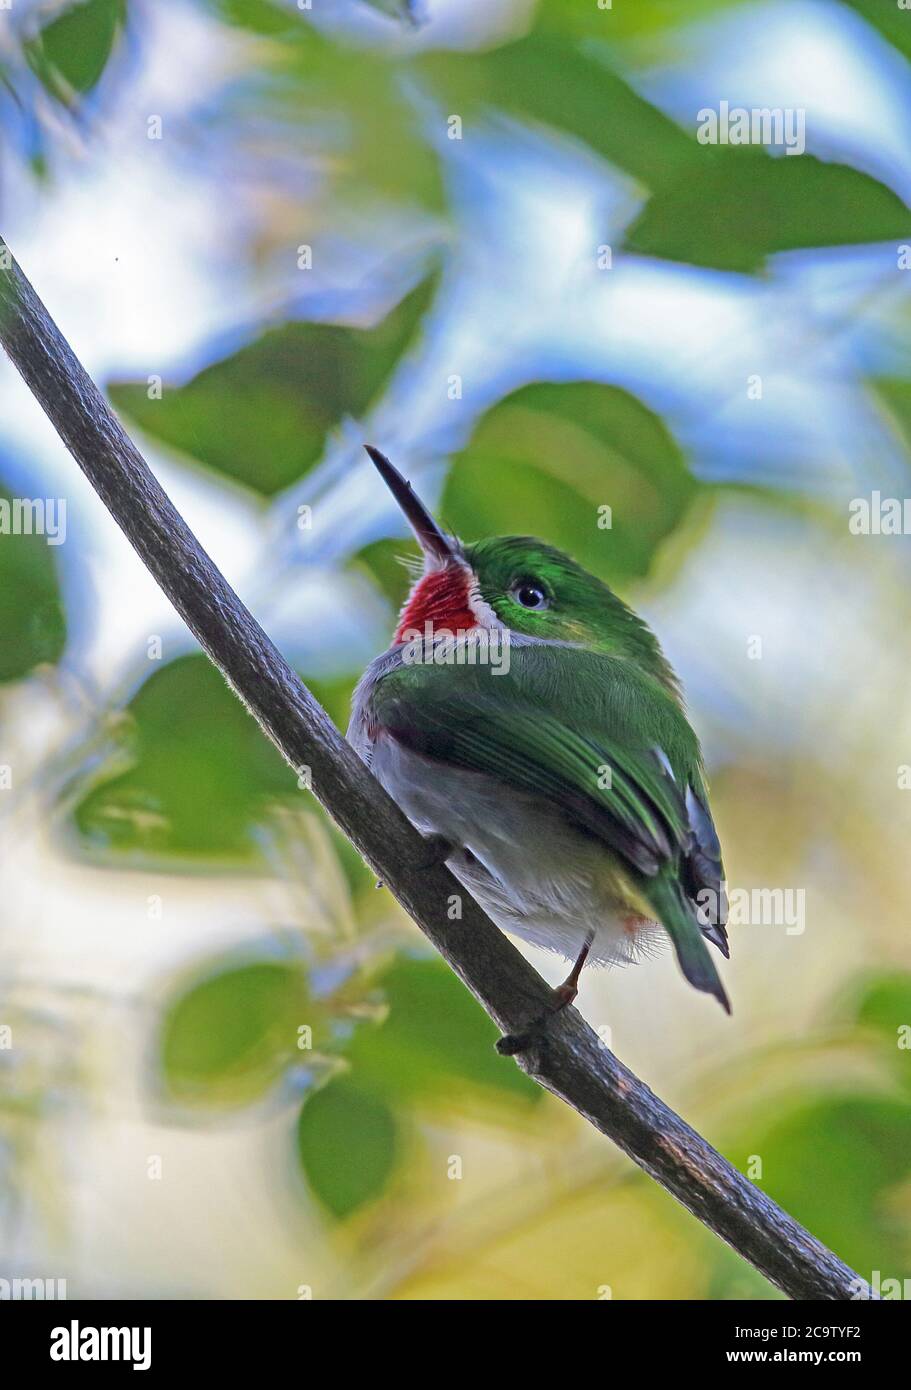 Narrow-billed Tody (Todus angustirostris) adult perched on branch  (endemic species)  Bahoruco Mountains NP, Dominican Republic                   Janu Stock Photo